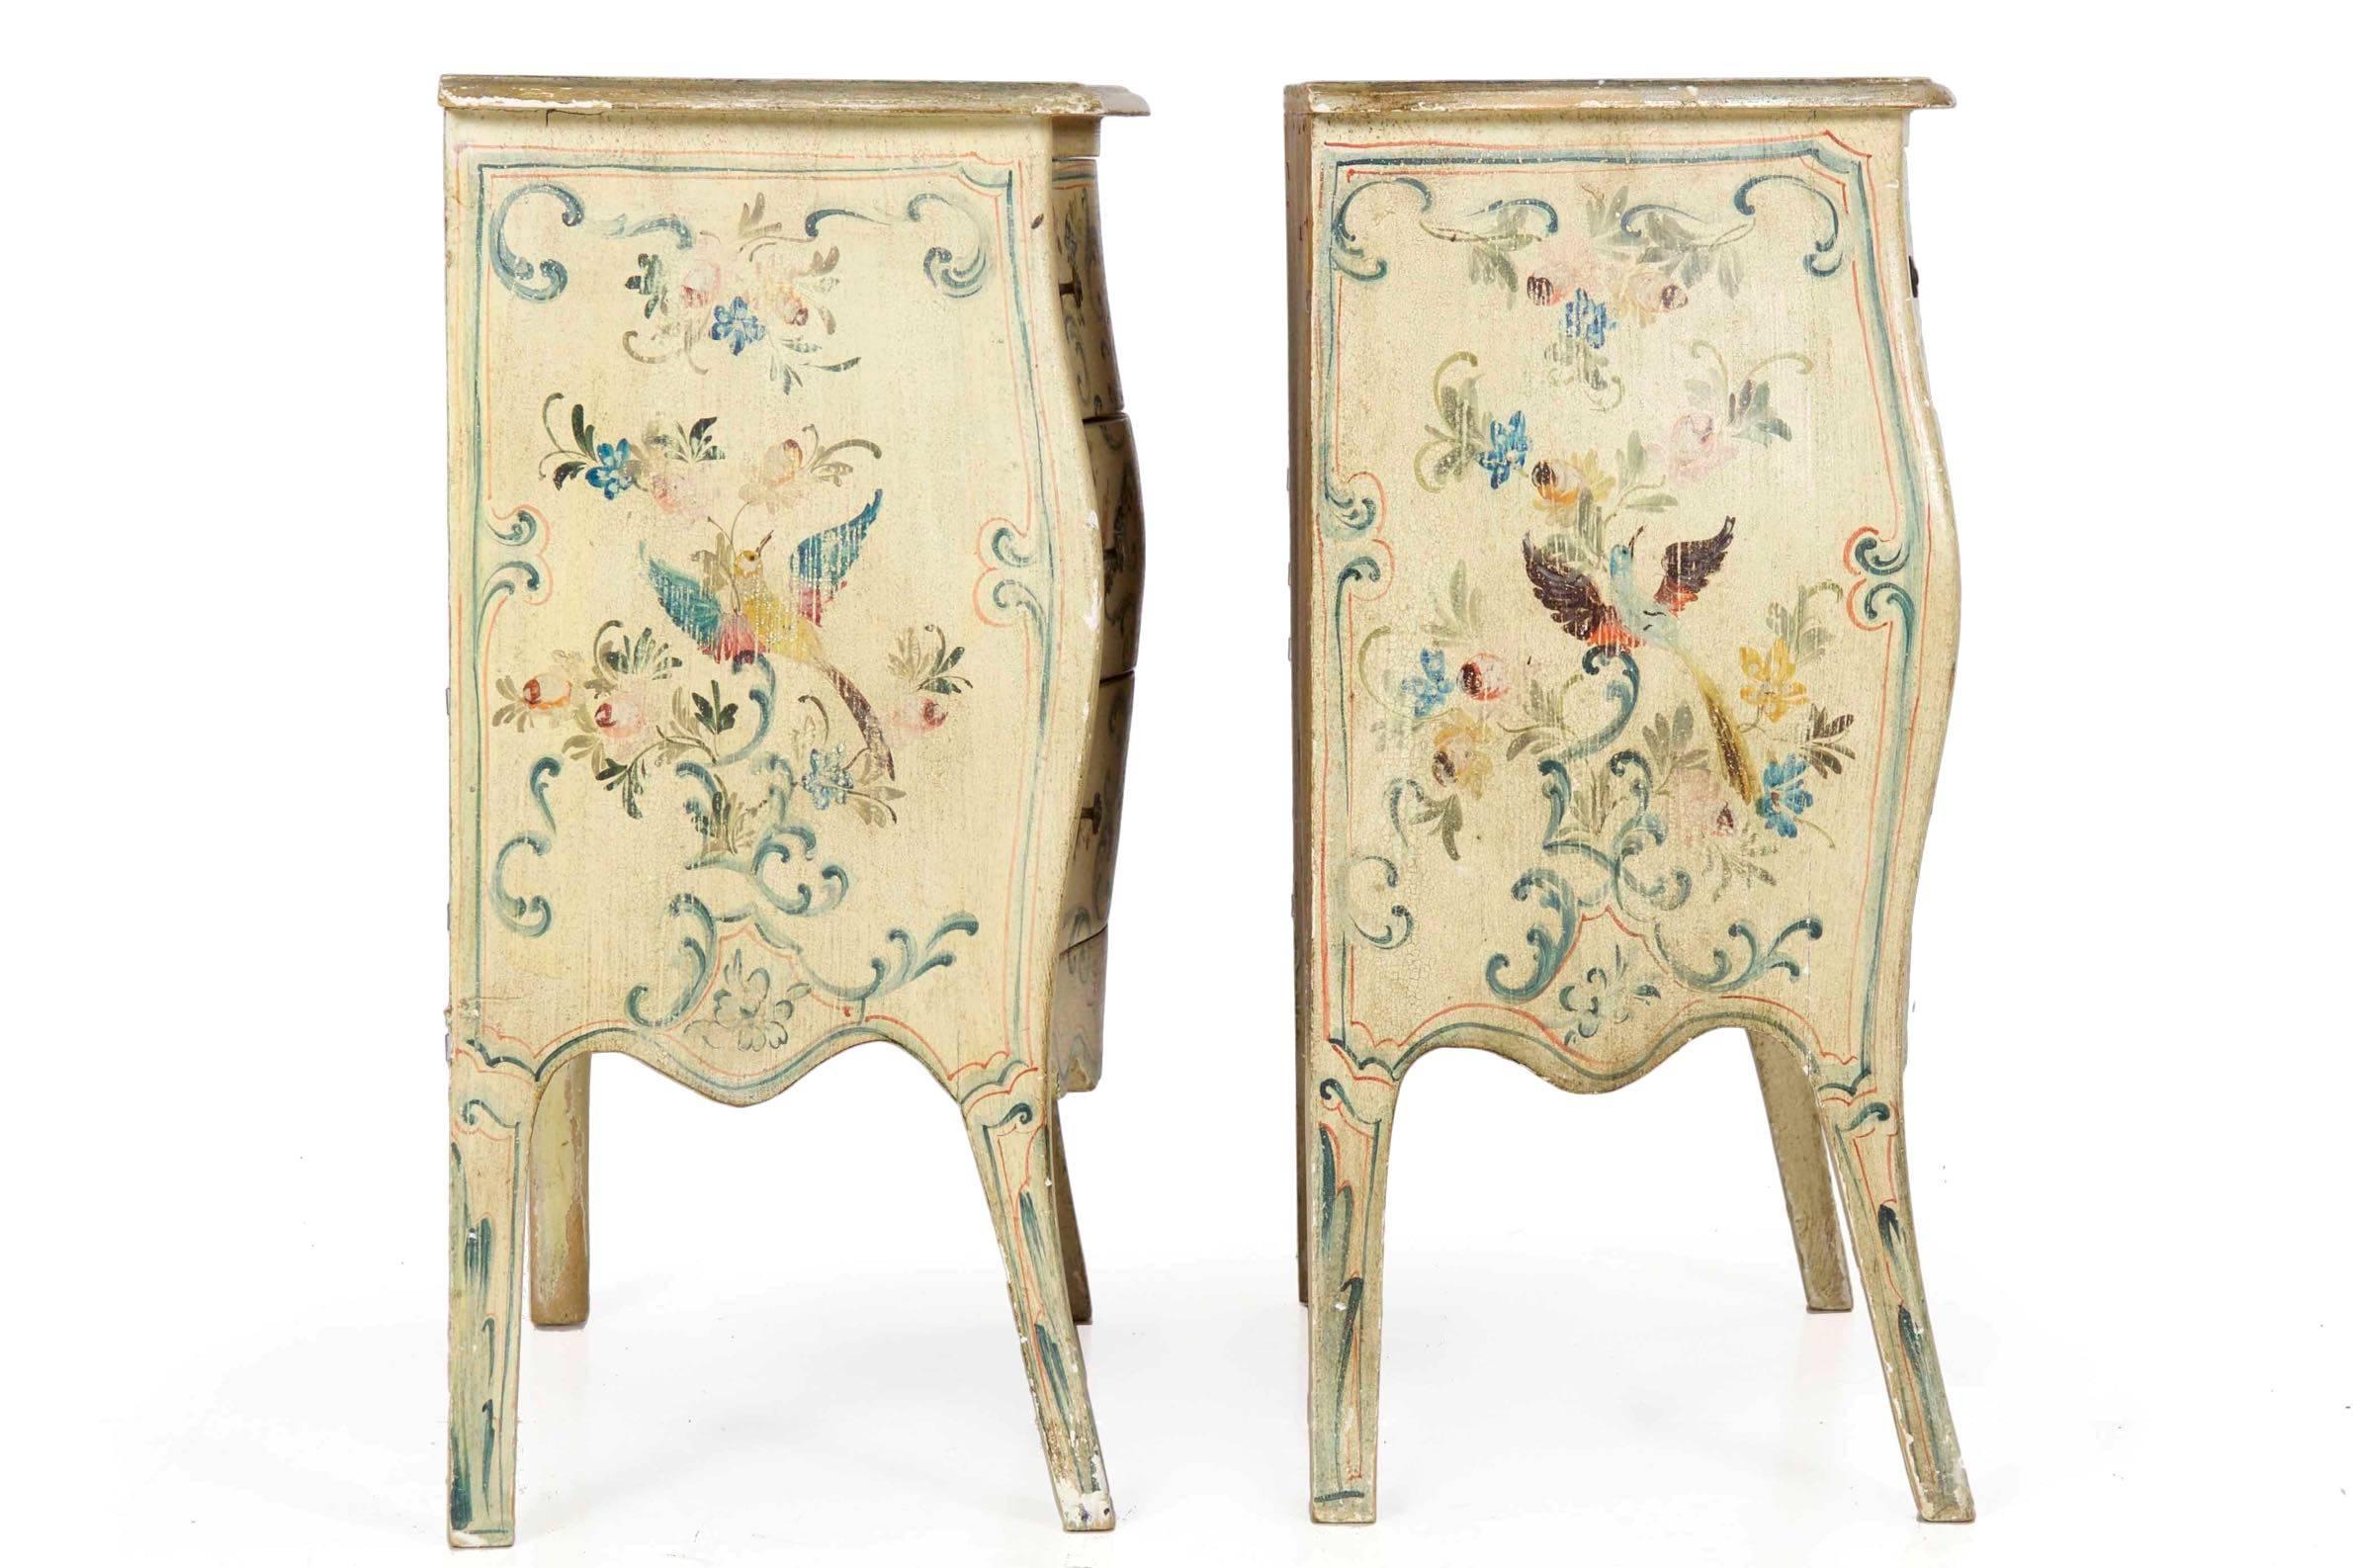 20th Century Pair of Venetian Rococo Hand-Painted Bedside Nightstand Commodes